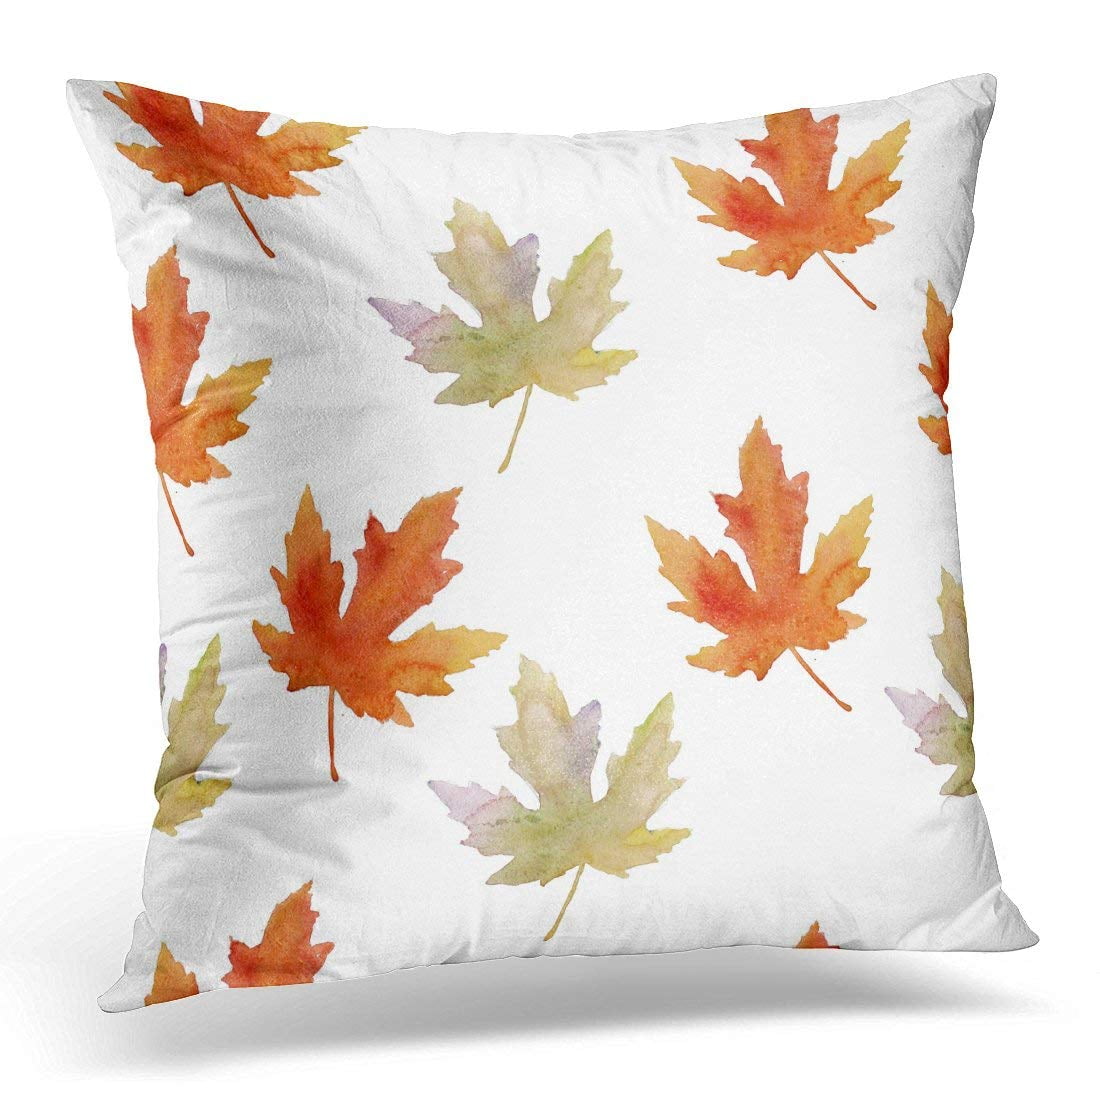 Emvency Set of 4 Linen Throw Pillow Covers 18x18 Inches Home Decorative Cushion Orange Autumn Theme Fall Maple Leaf Tree Pillow Cases Square Pillocases for Bed Sofa 